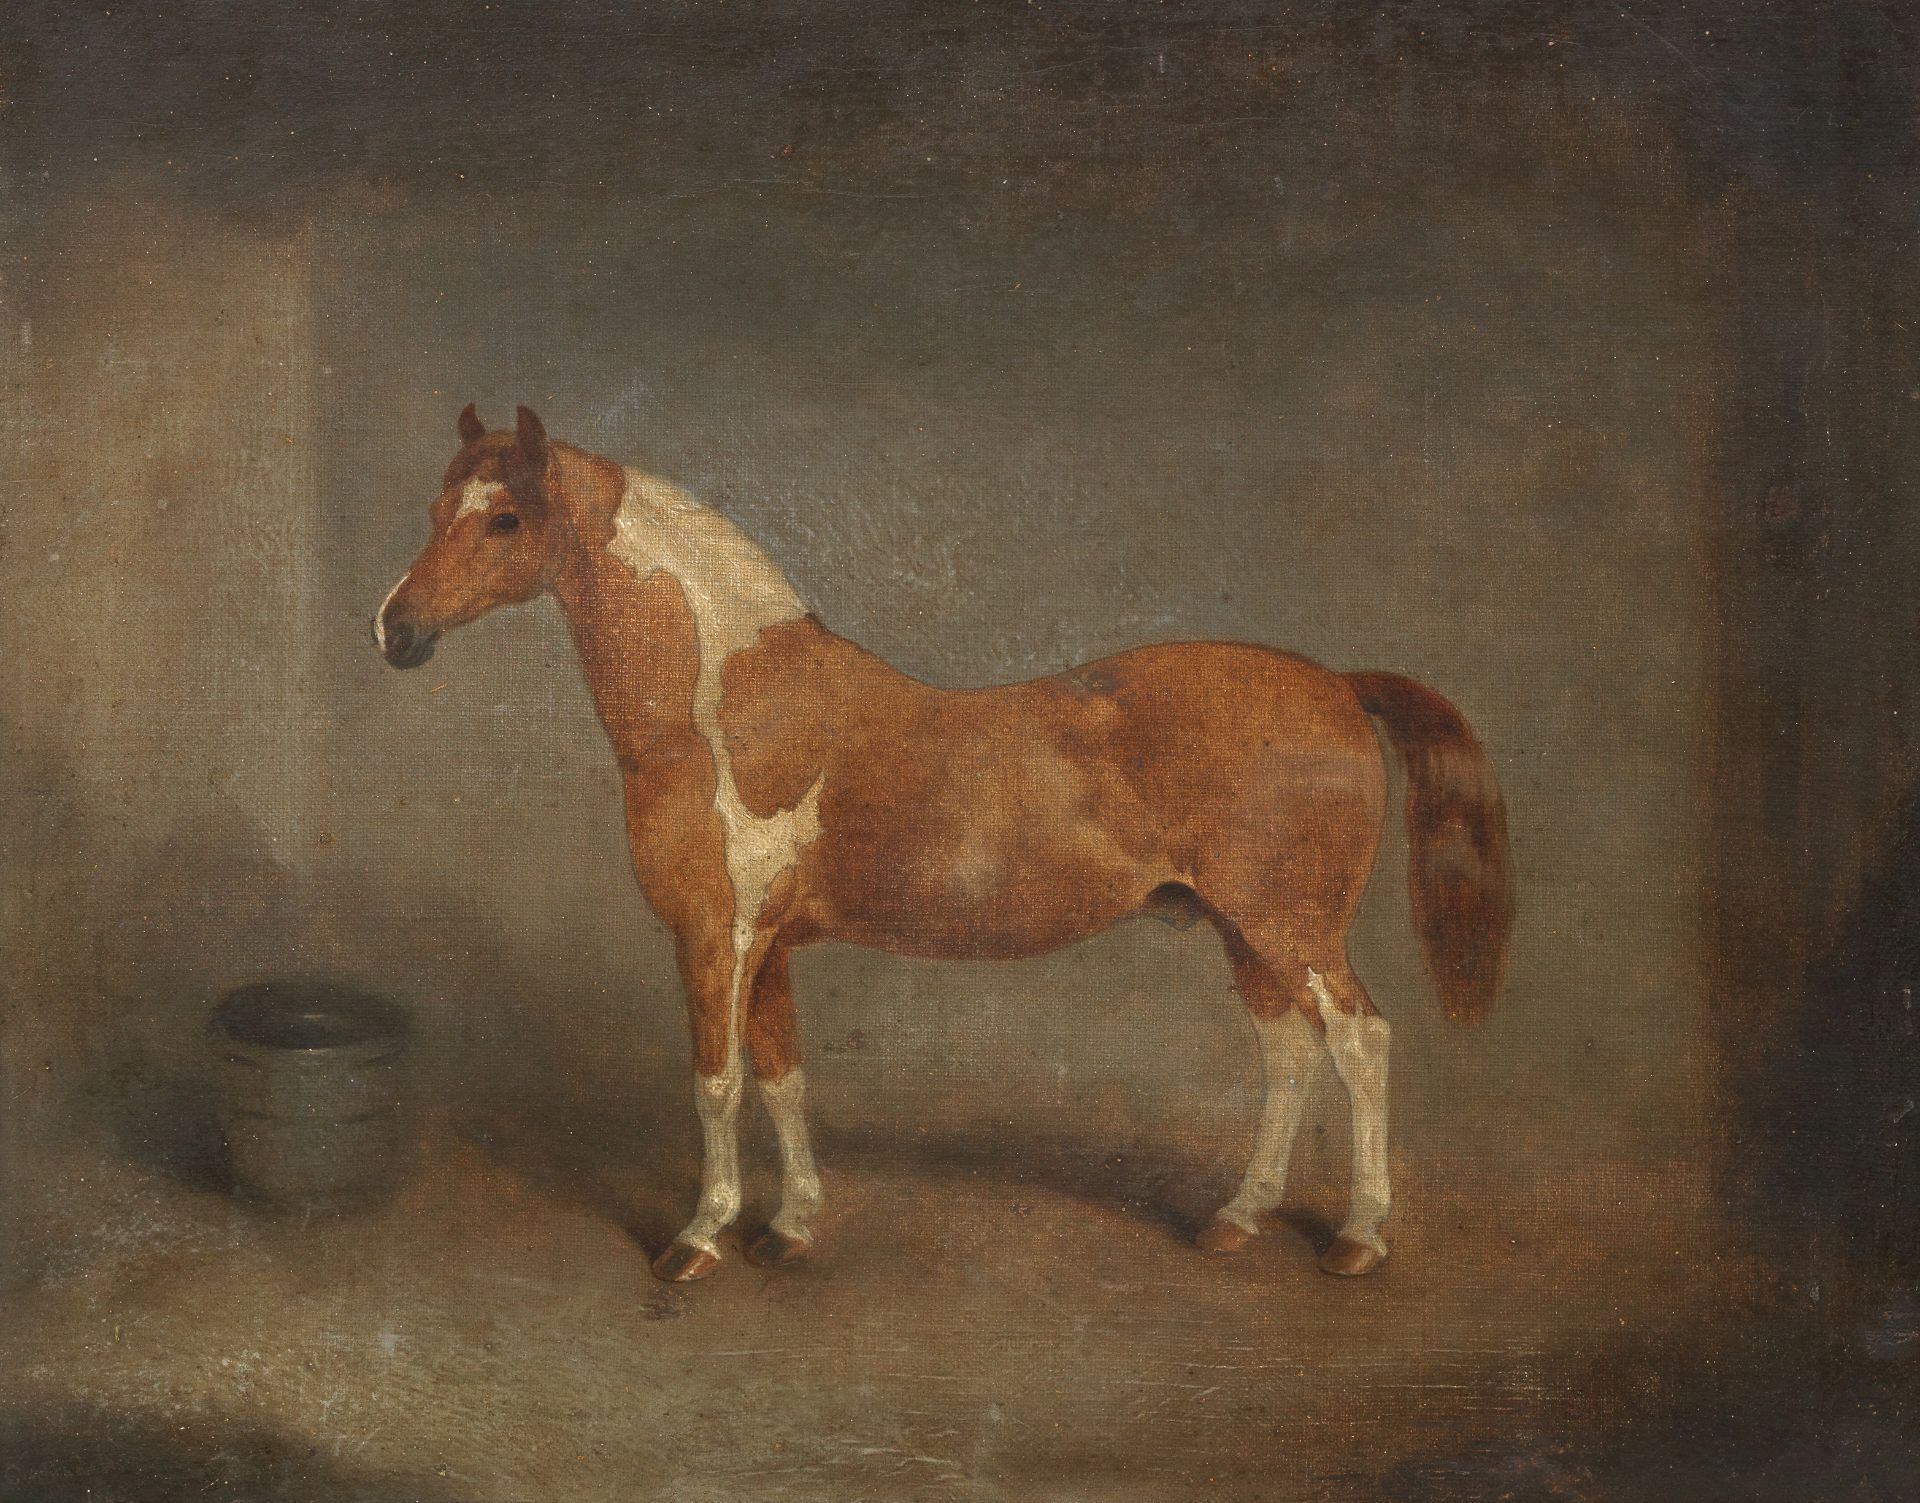 Attributed to William Henry Carpendale (British 1830-1883) Skewbald Pony in Stable